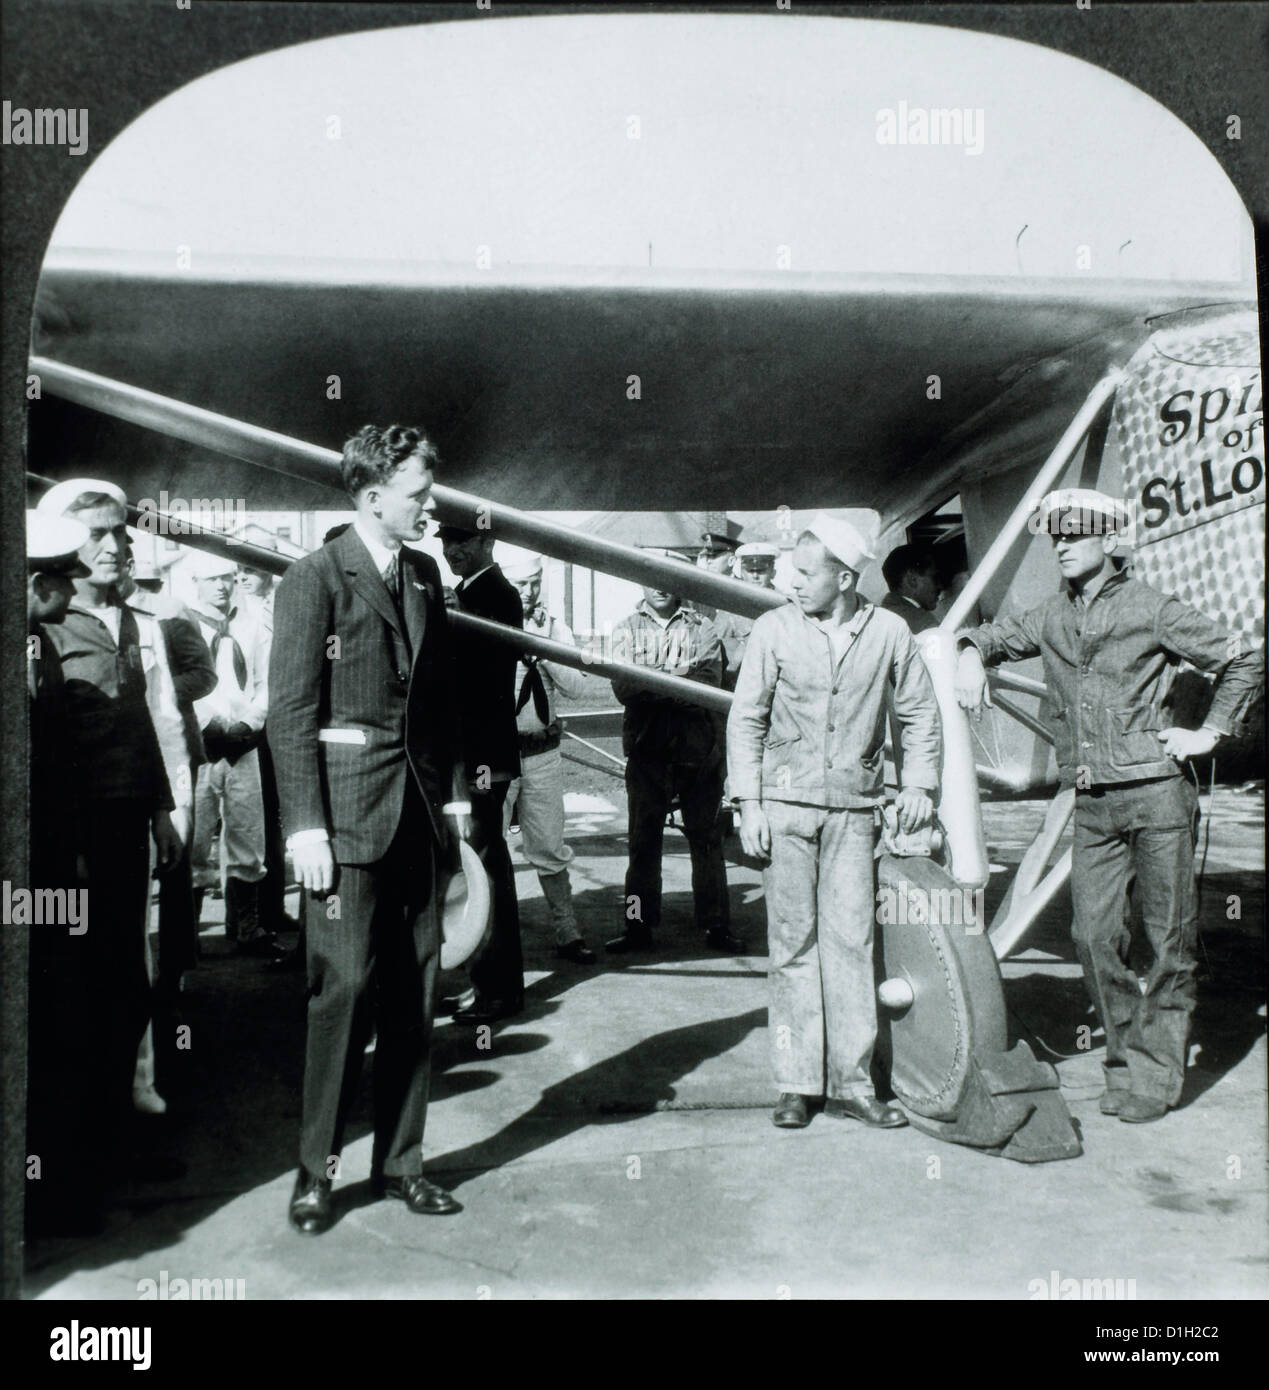 Charles Lindbergh landing at Croyden, England in 1927 in his plane Spirit  of St Louis From The Story of 25 Eventful Years in Pictures, published  193 - SuperStock